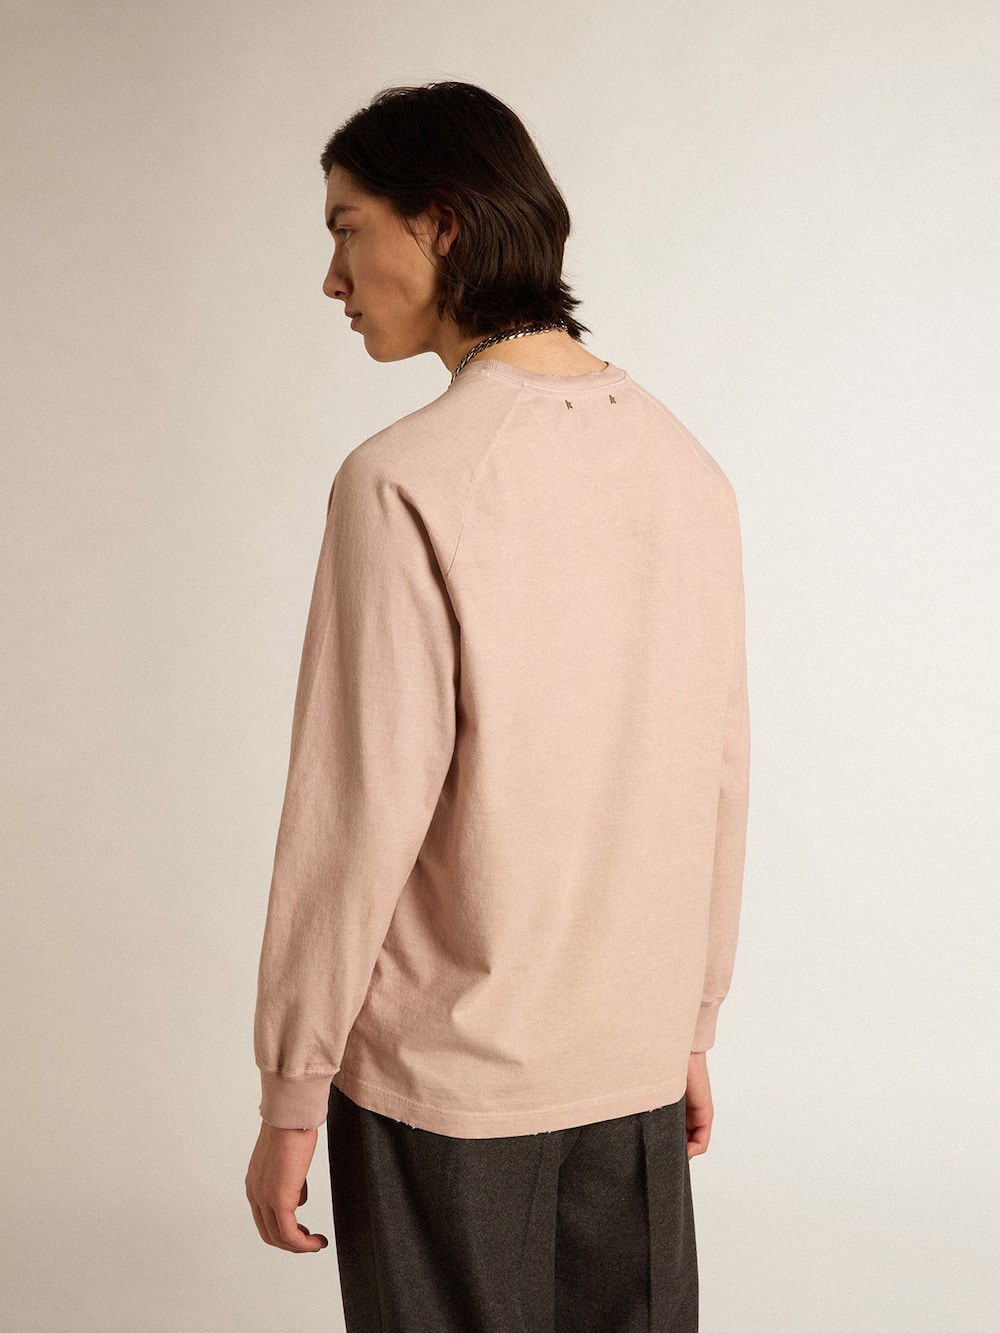 Golden Goose - Powder-pink T-shirt with white lettering on the front in 